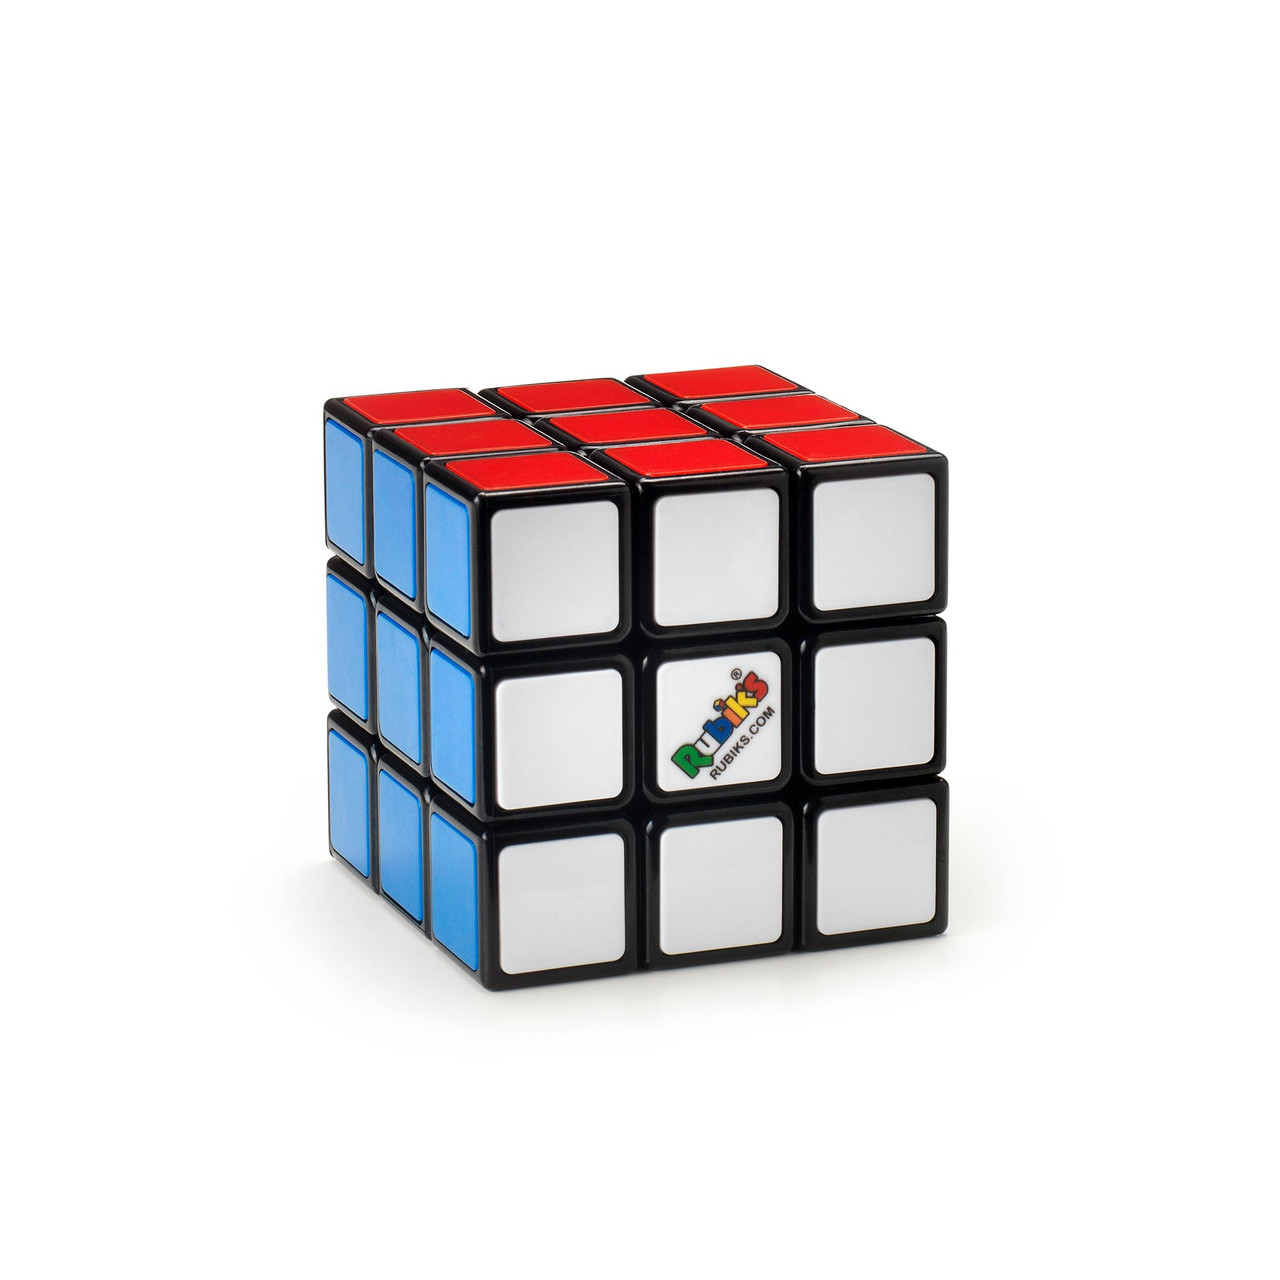 Rubiks Cube–The Original 3x3 Puzzle (On Order) (Sold Out - Notification Only) - Game Barrister